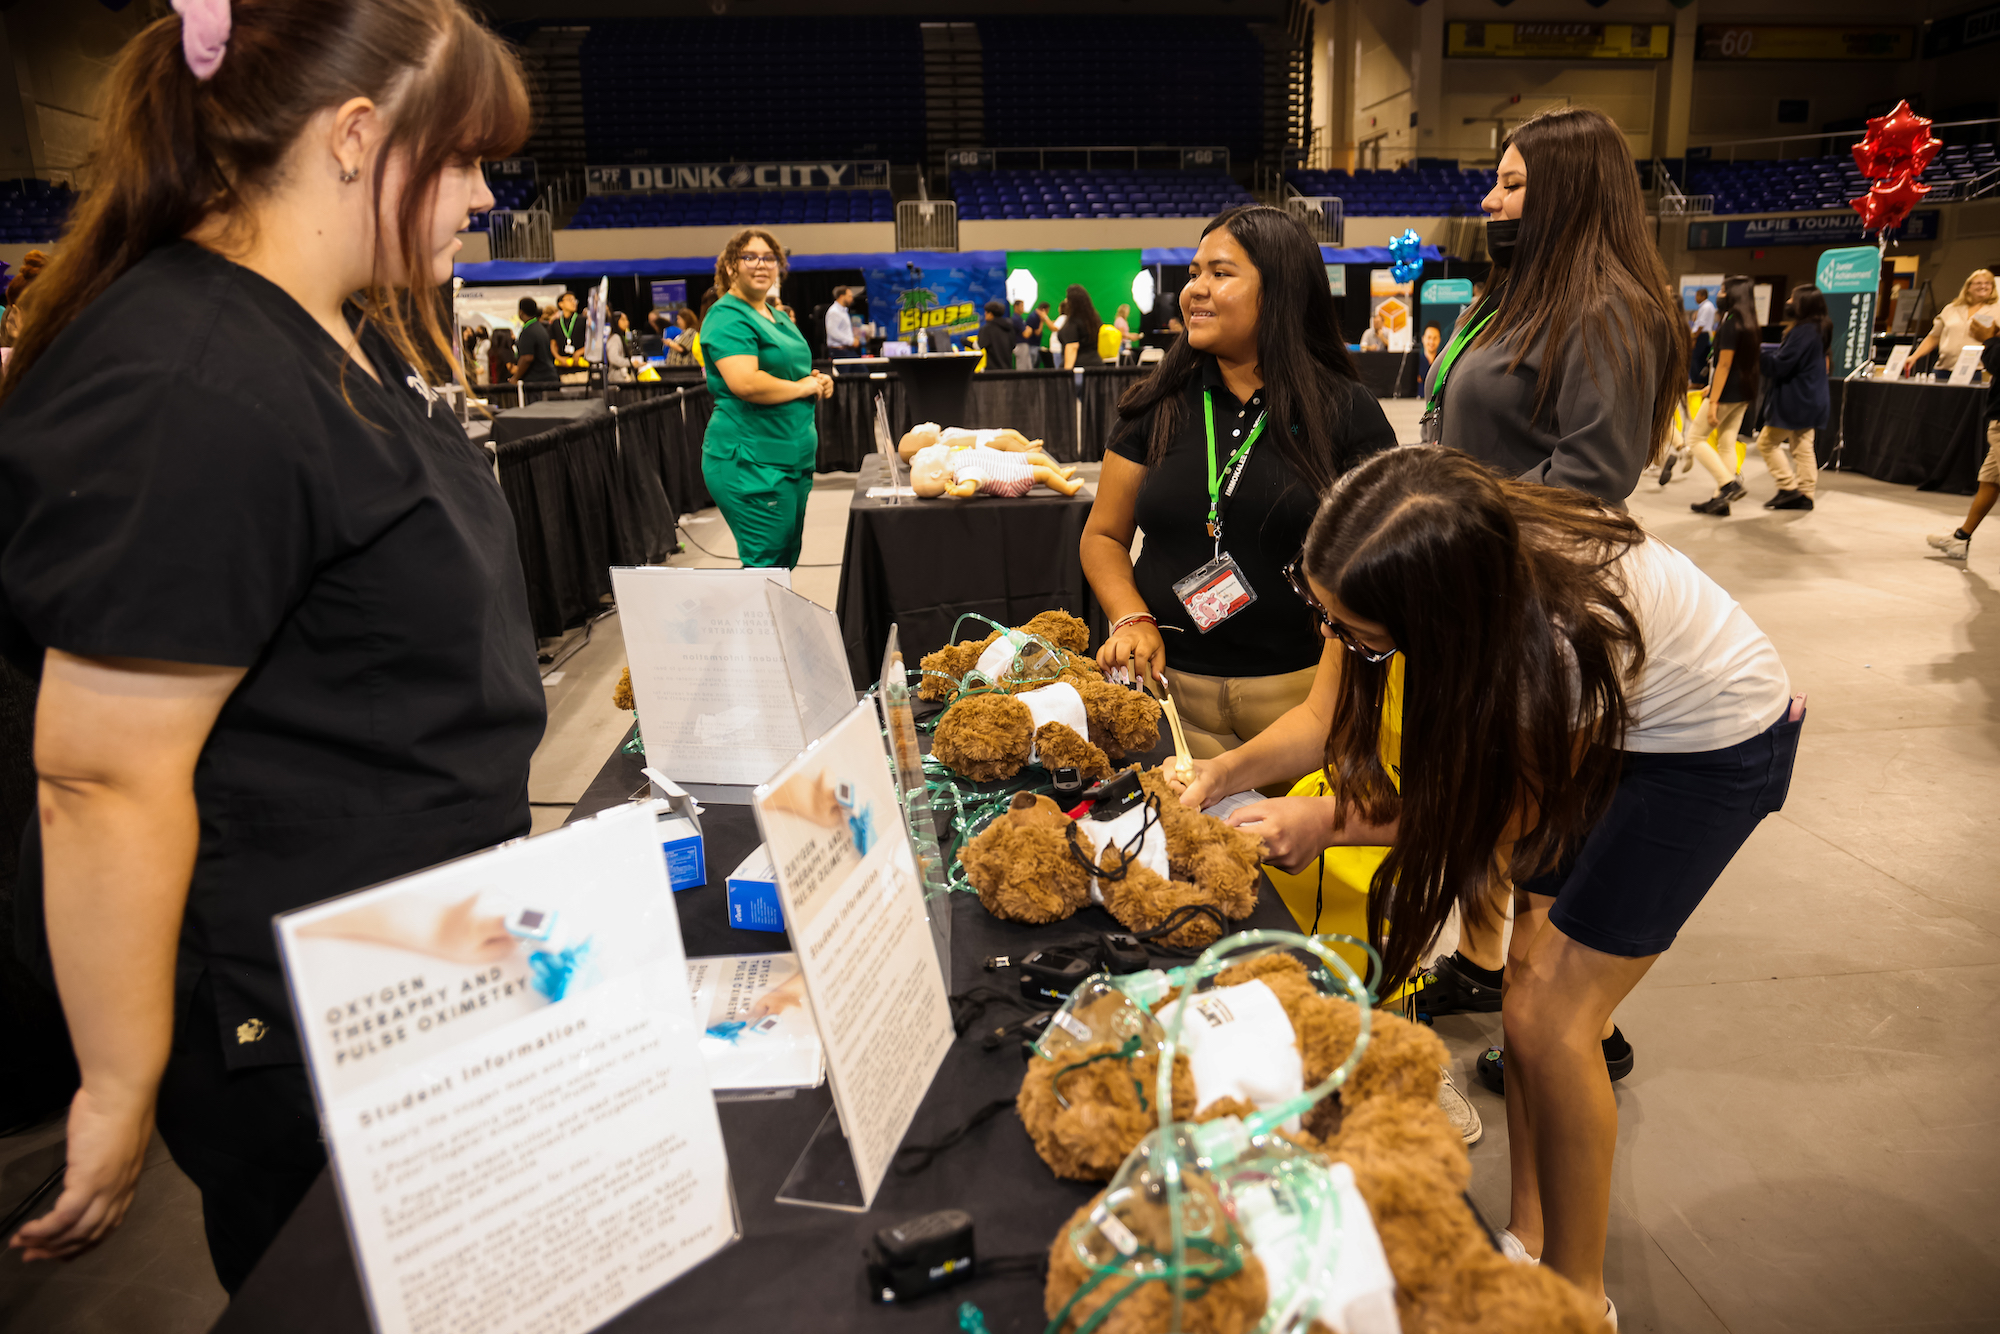 Largest career expo in Southwest Florida history recently hosted by Junior Achievement